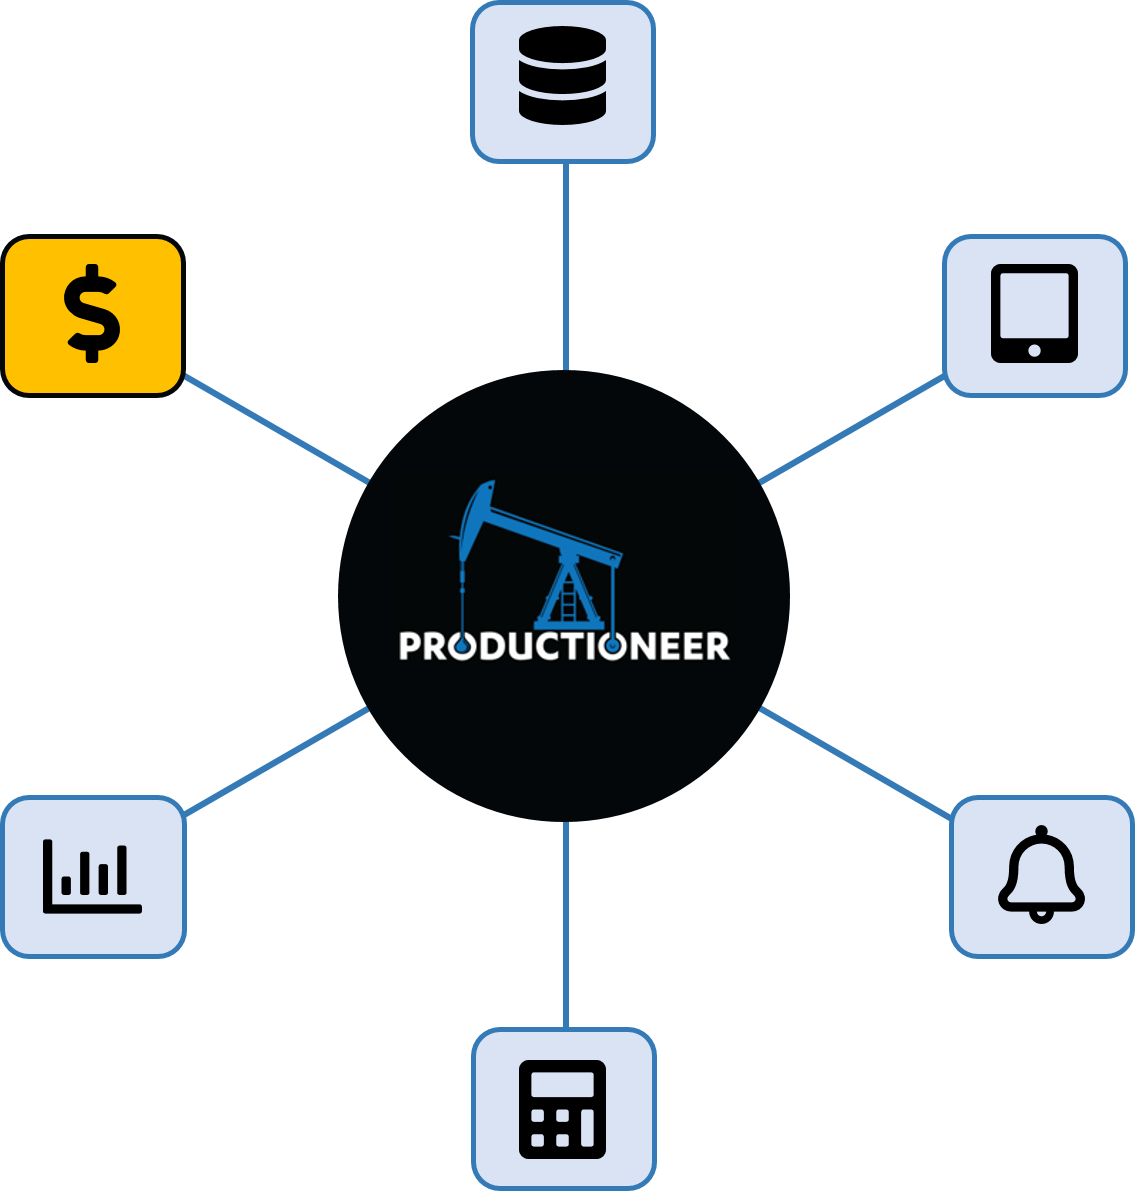 Productioneer expenditure tracking feature wheel